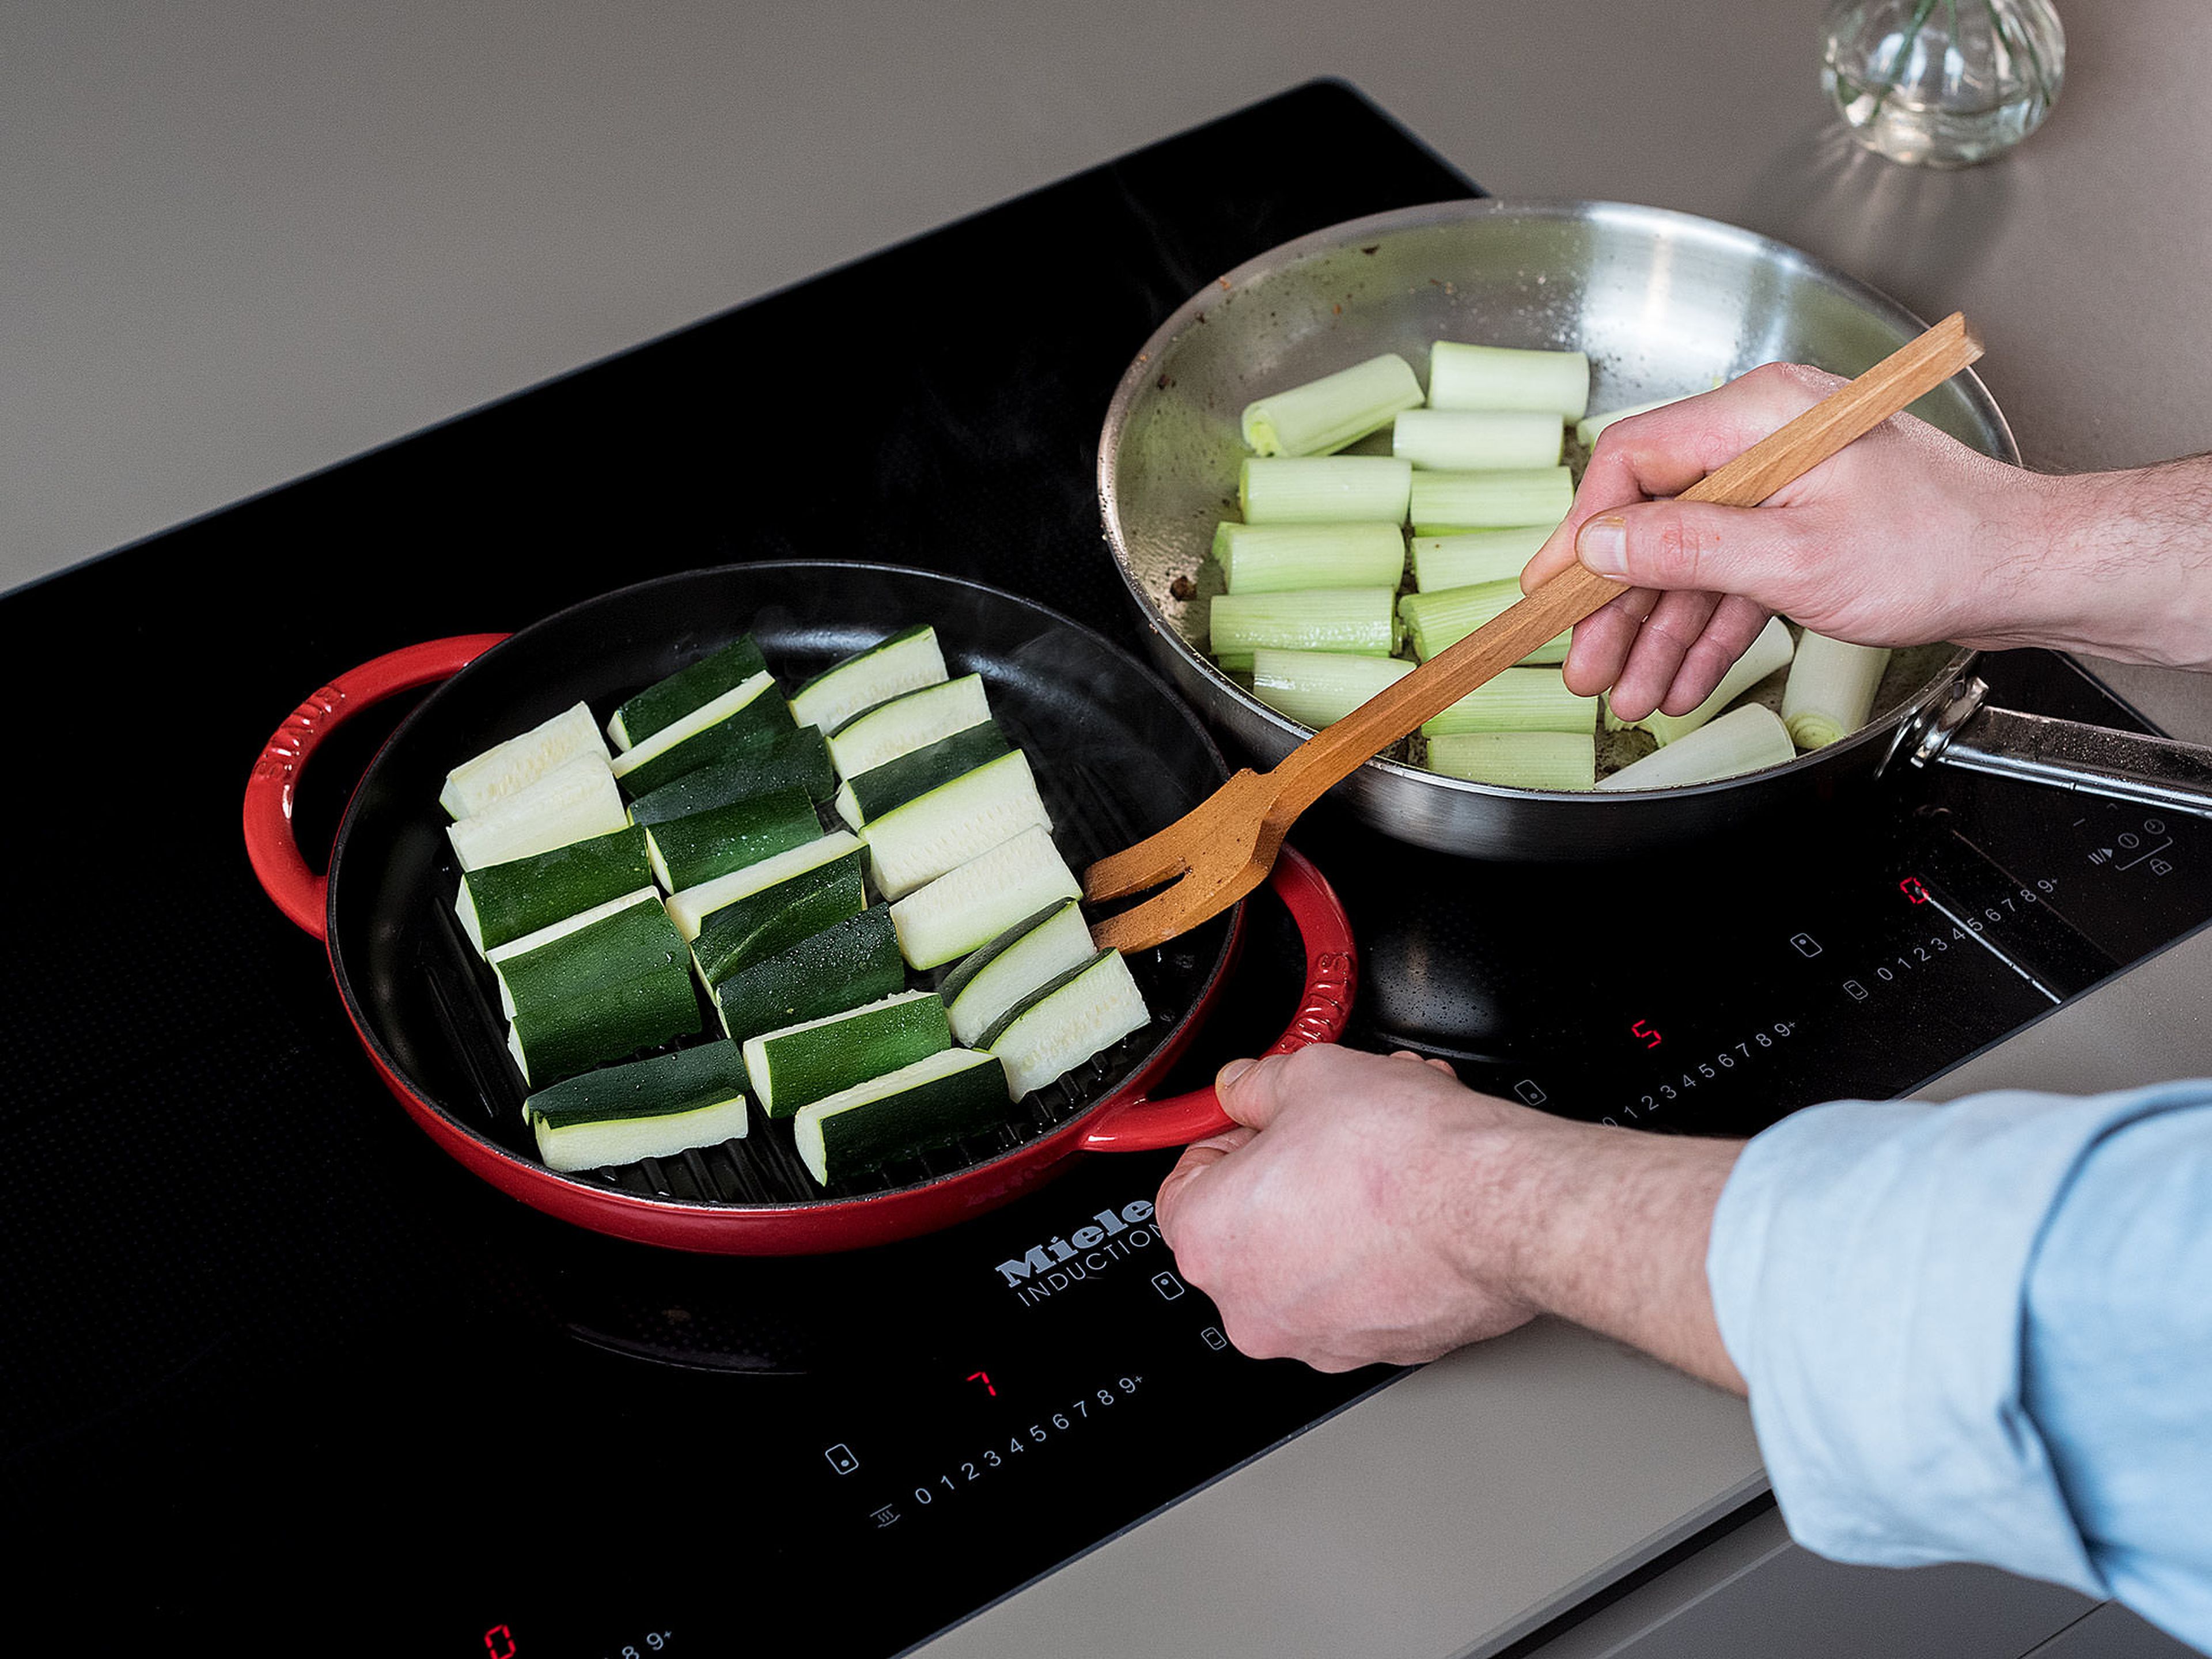 Cut leek into 5-cm/2-in. pieces and halve lenghtwise. In a frying pan, sauté for approx. 10 min., cut-side down, until they caramelize and char slightly, then flip and sauté for a few minutes on the other side, until softened. Set aside.